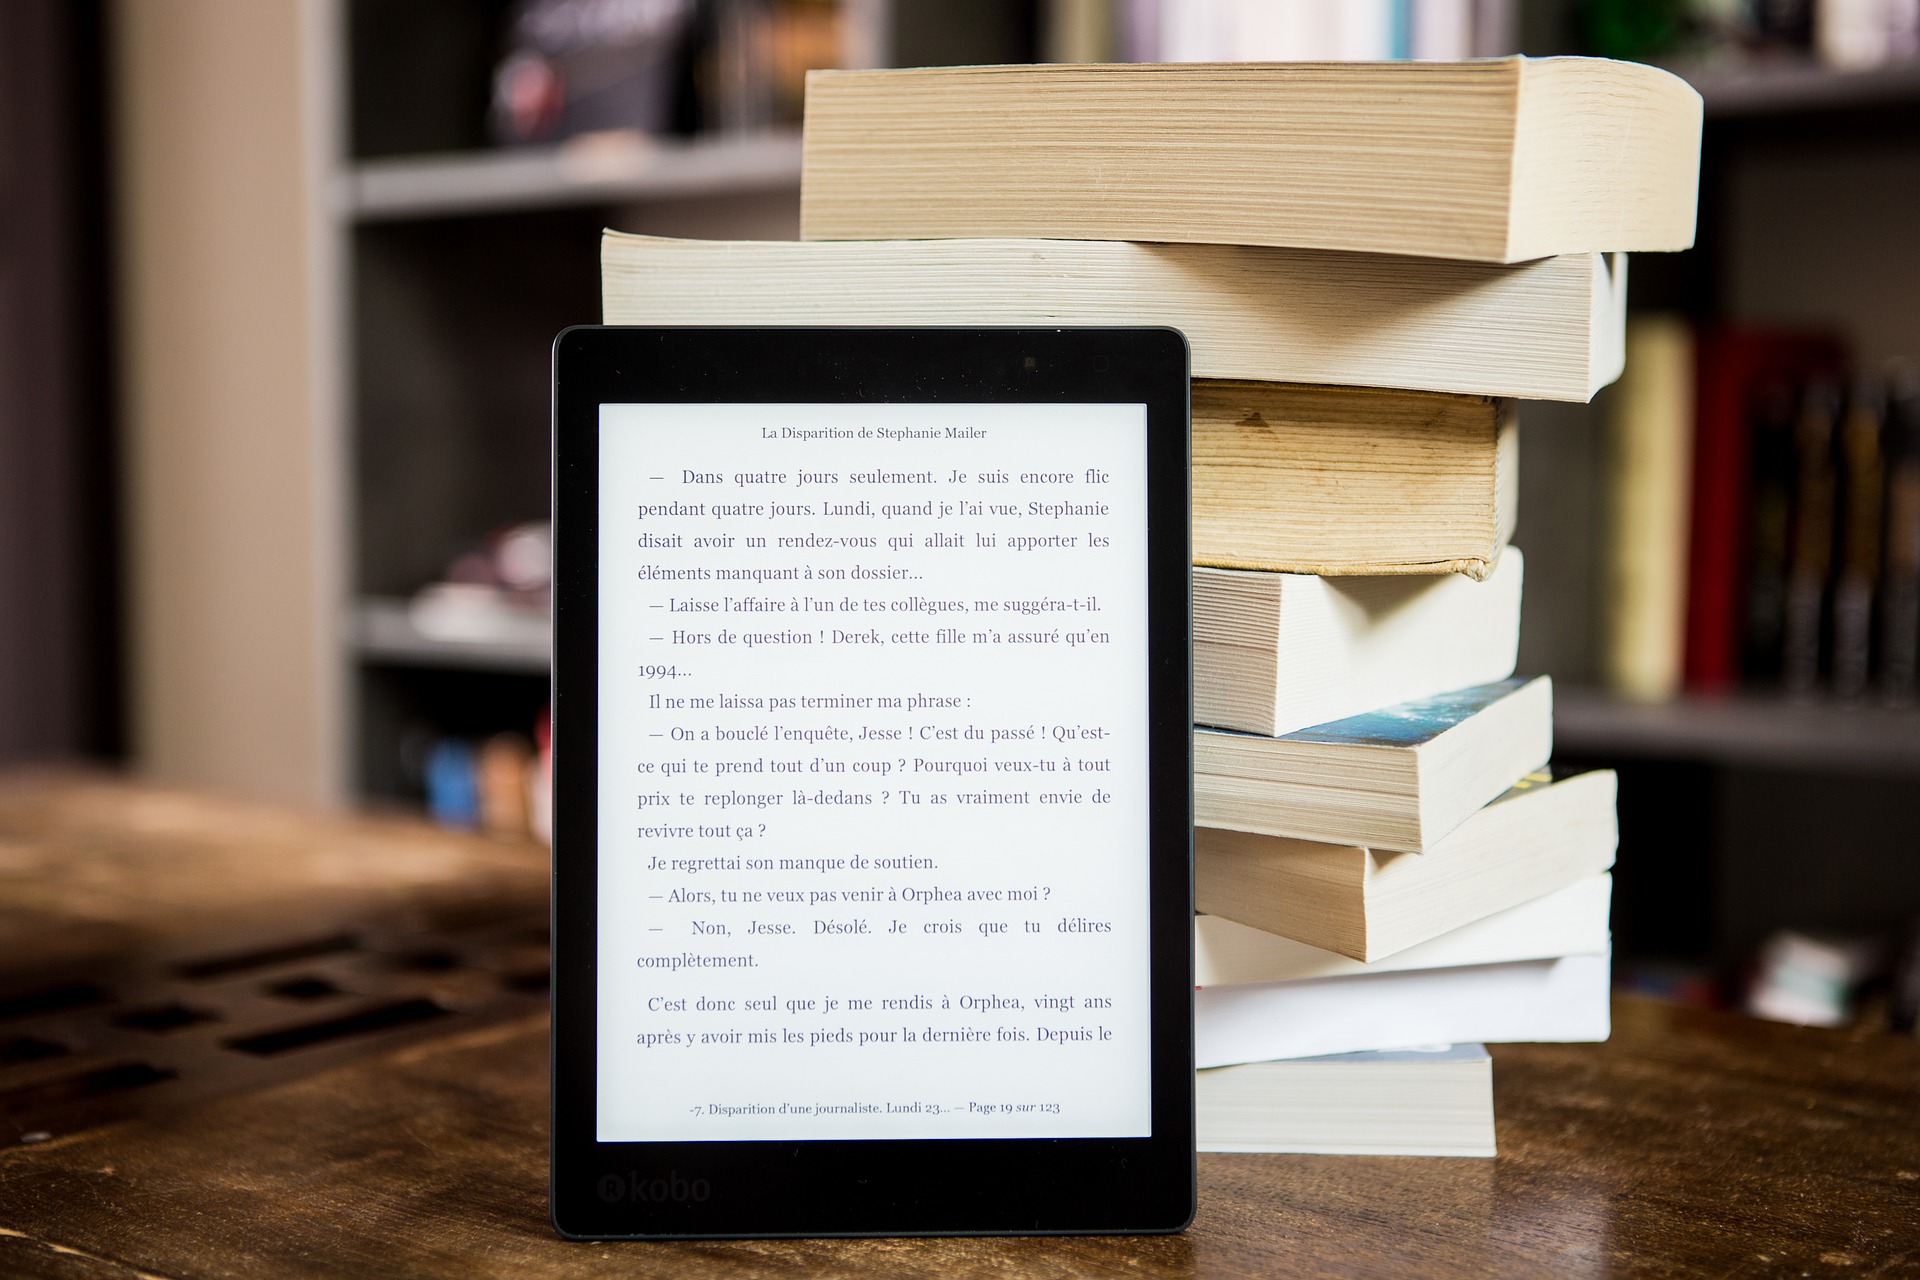 ebook reader with a stack of books